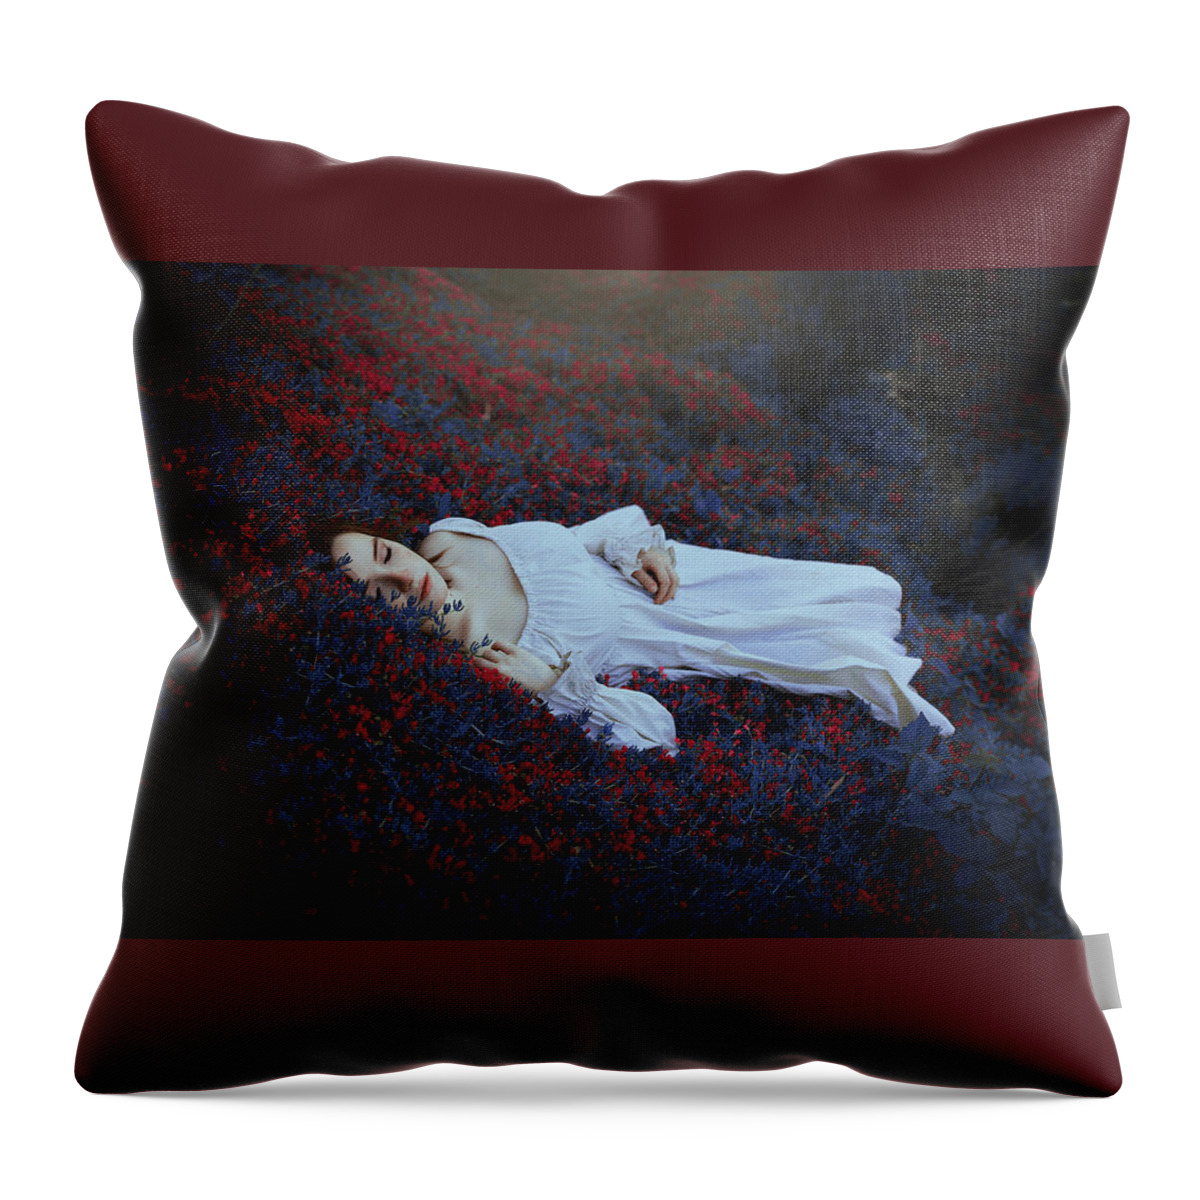 Mood Throw Pillow featuring the digital art Mood by Maye Loeser